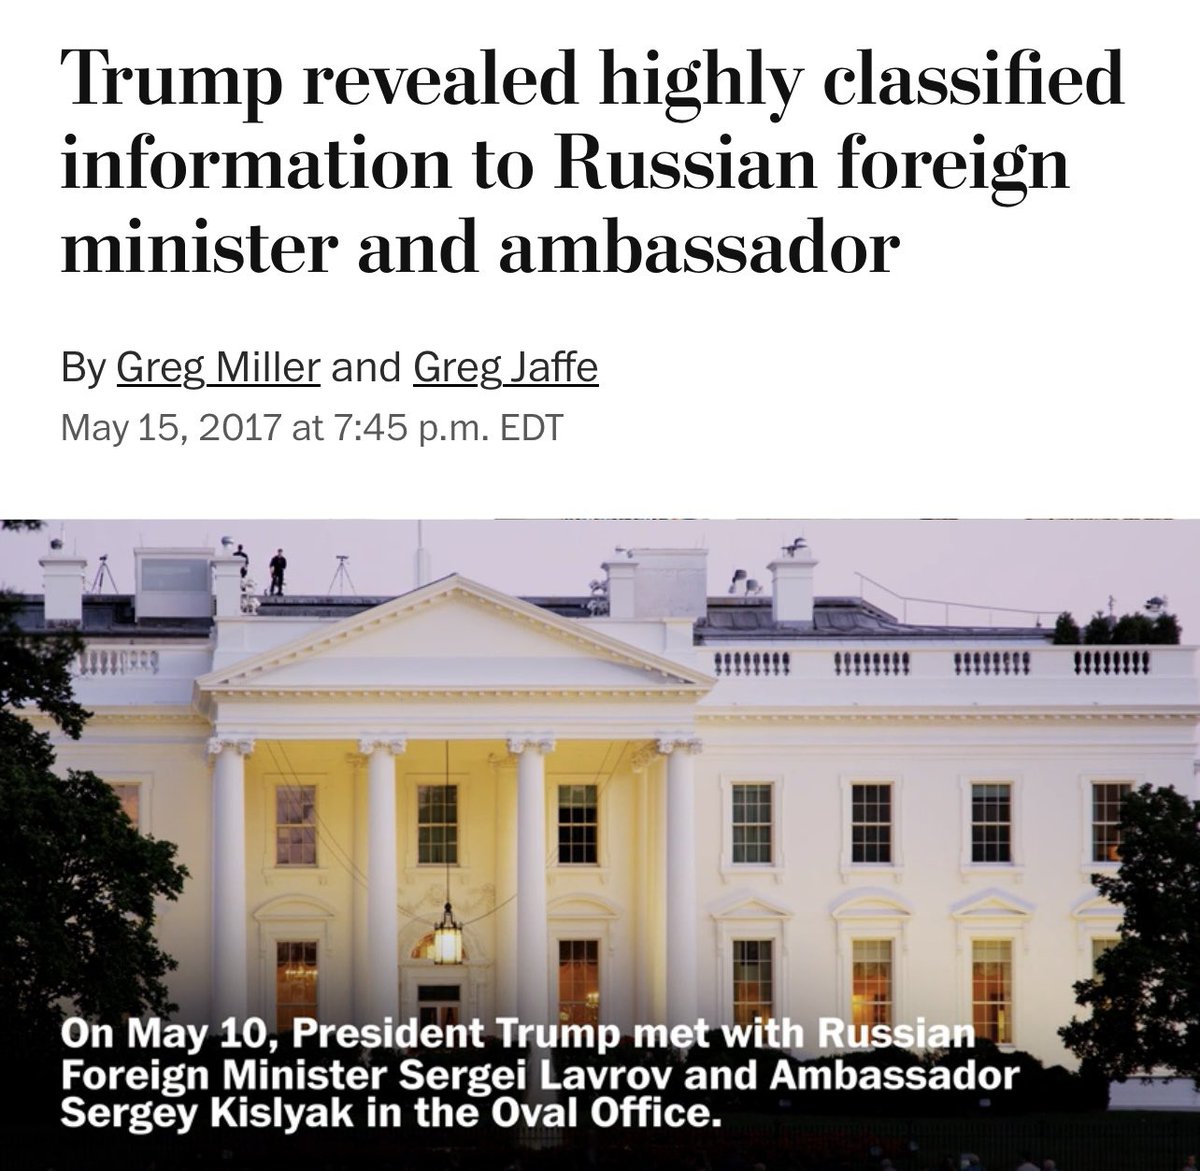 REMINDER: Trump shared highly classified intelligence secrets, most likely obtained from Israel, with Russia’s foreign minister and ambassador in an Oval Office meeting. Trump was then — and remains today — a traitor. #TraitorTrump